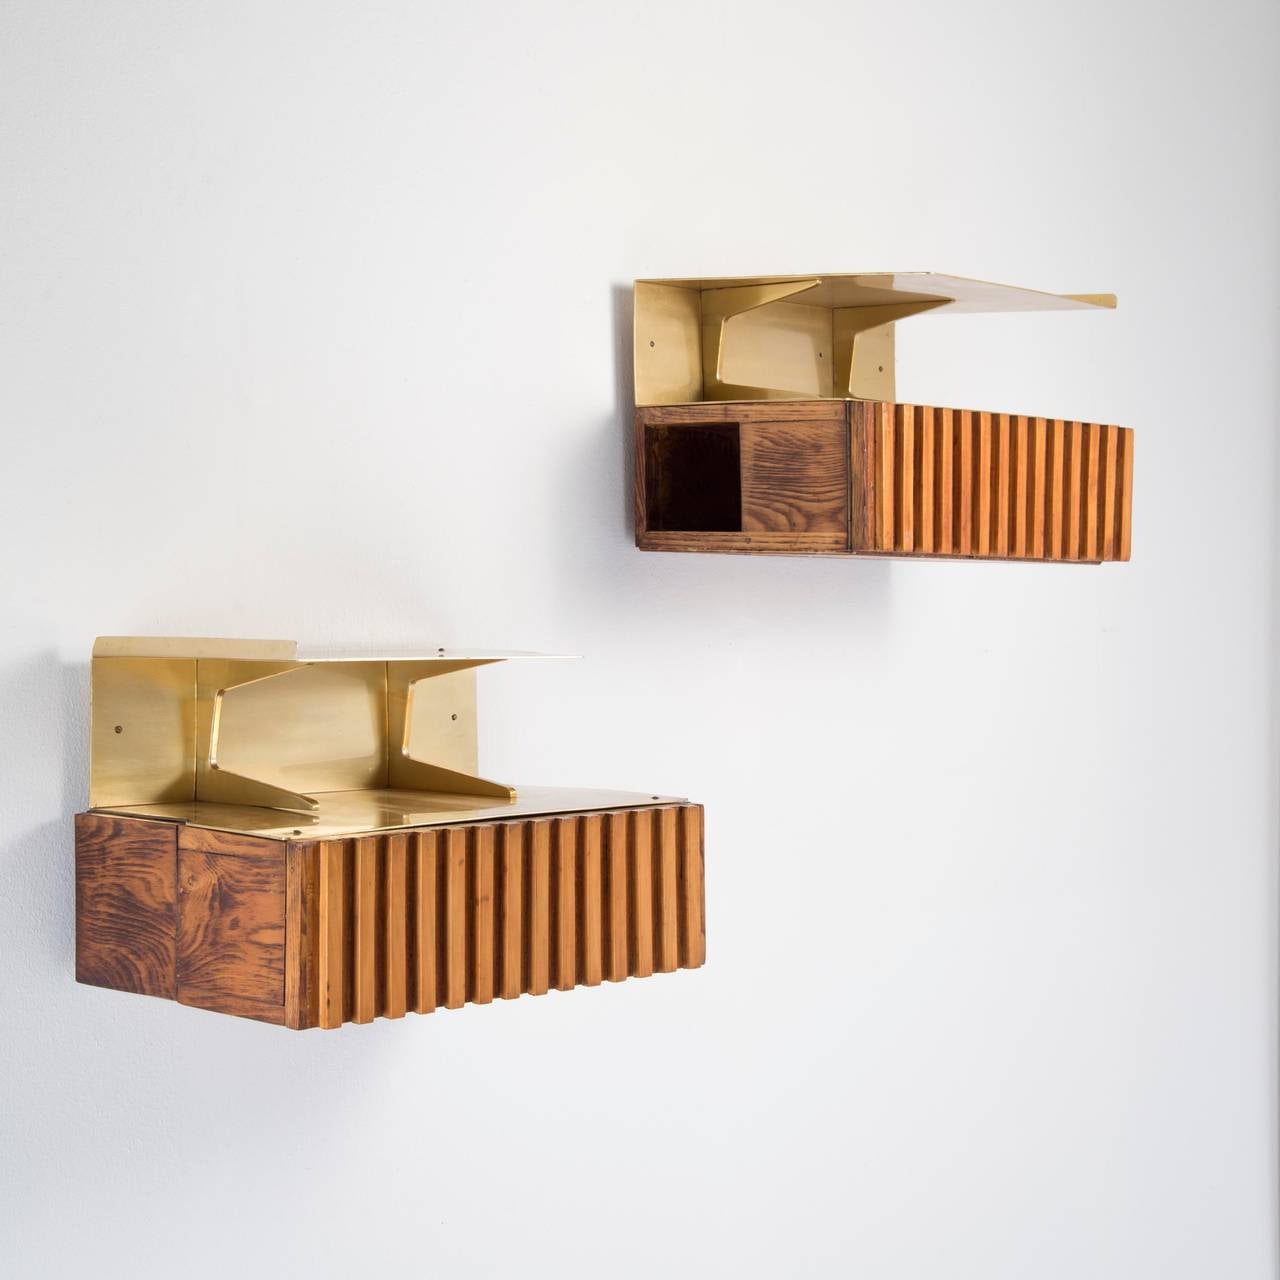 Italian Pair of Wall-Mounted Night Stands by Nestorio Sacchi, 1949